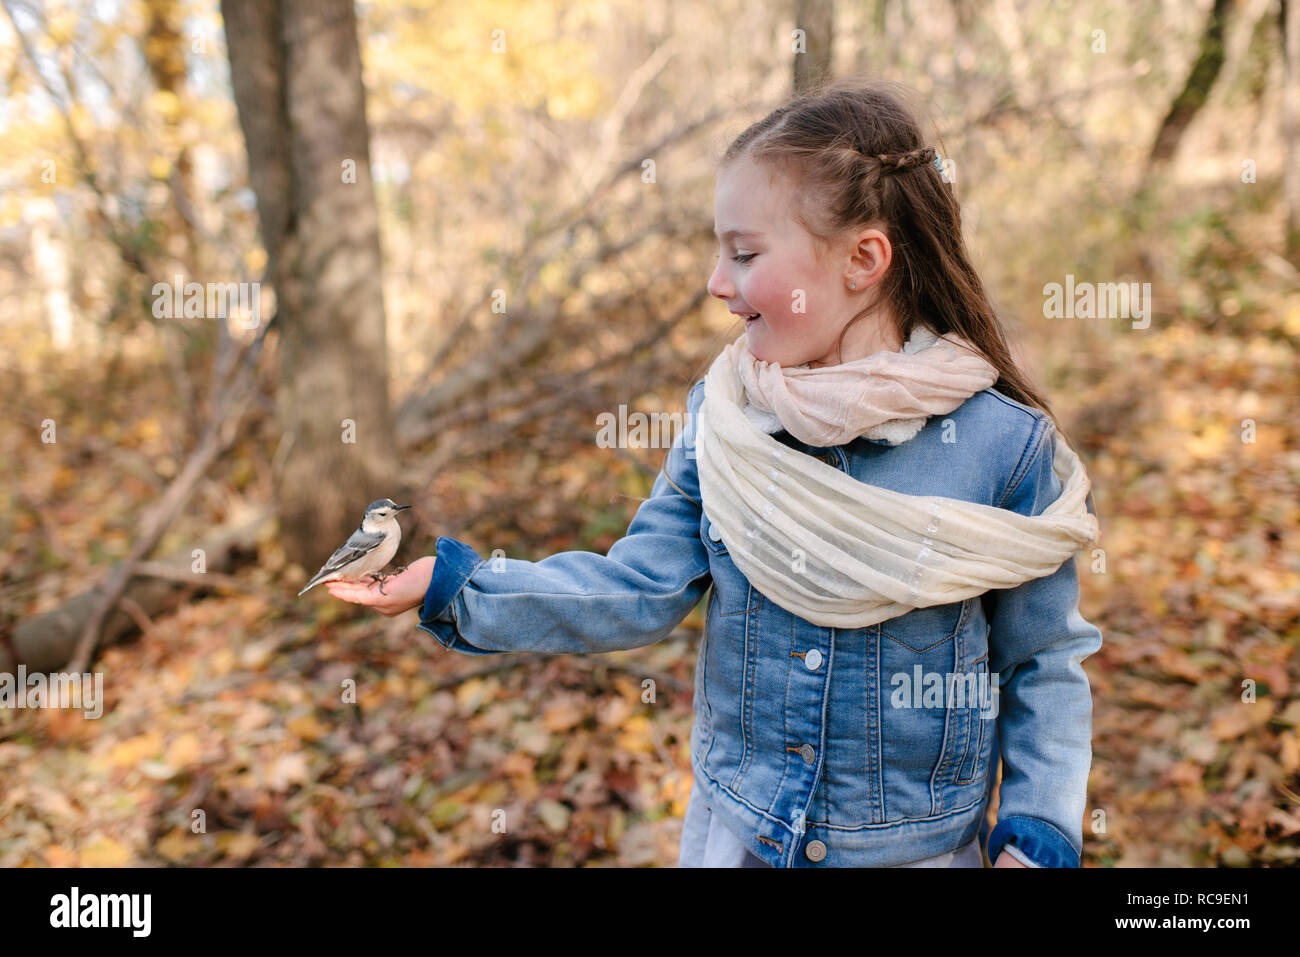 Little girl holding bird on palm in forest Stock Photo